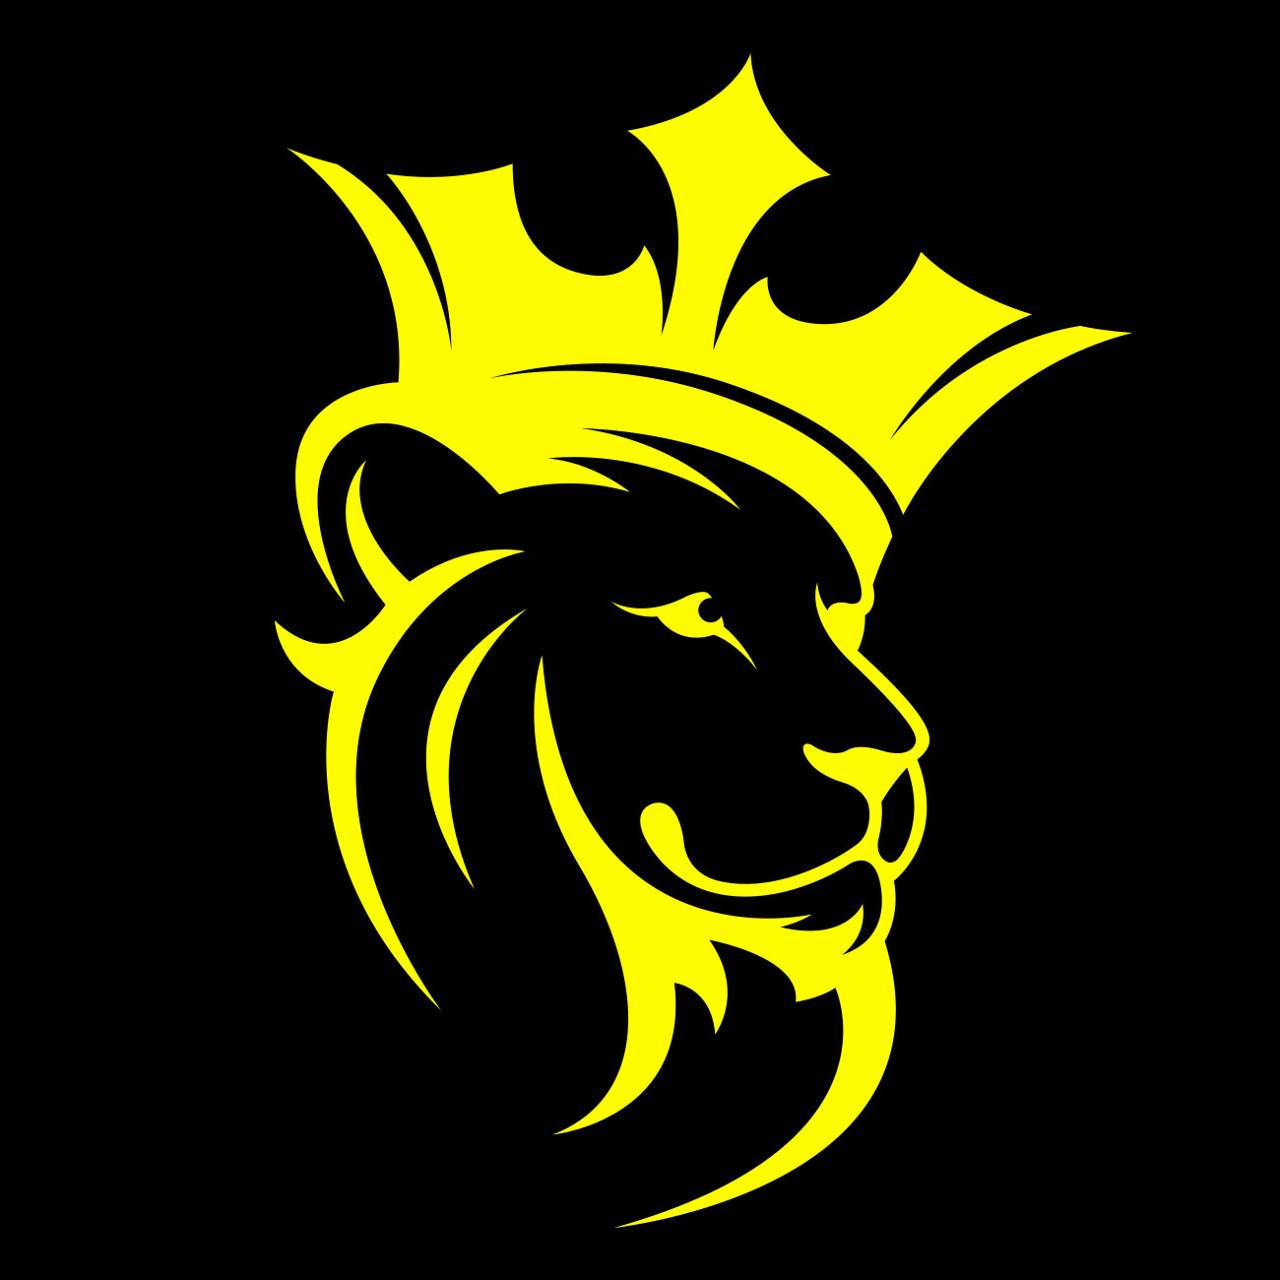 Cheery Lion Crowned King Logo Background